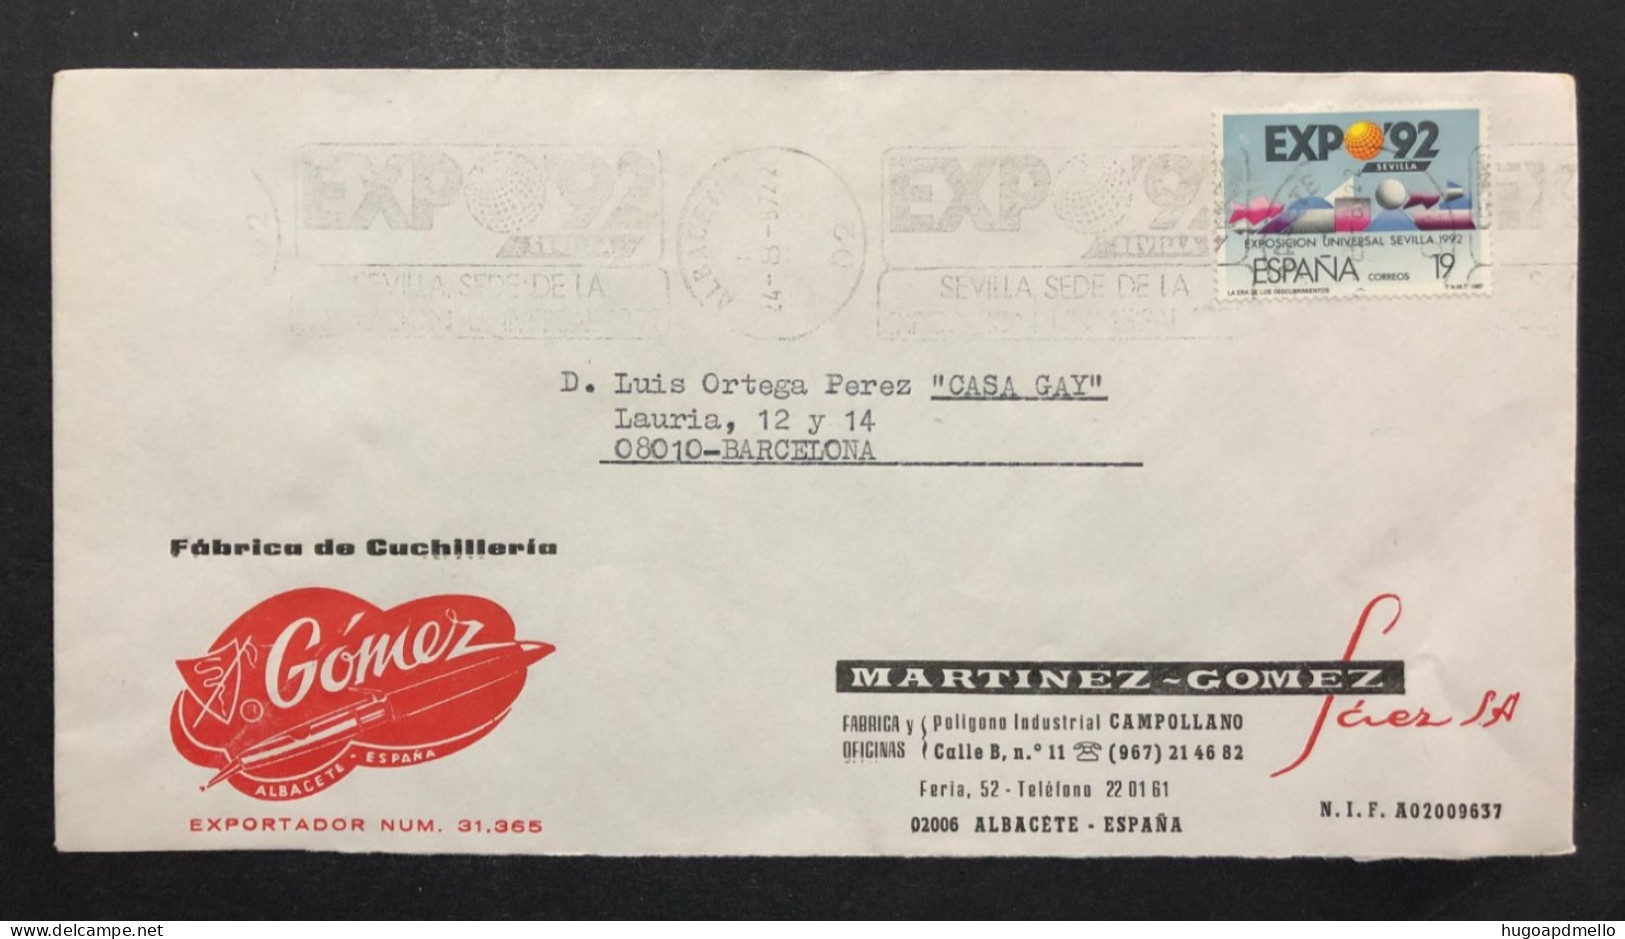 SPAIN, Cover With Special Cancellation « EXPO '92 », « ALBACETE  Postmark », 1987 - 1992 – Séville (Espagne)